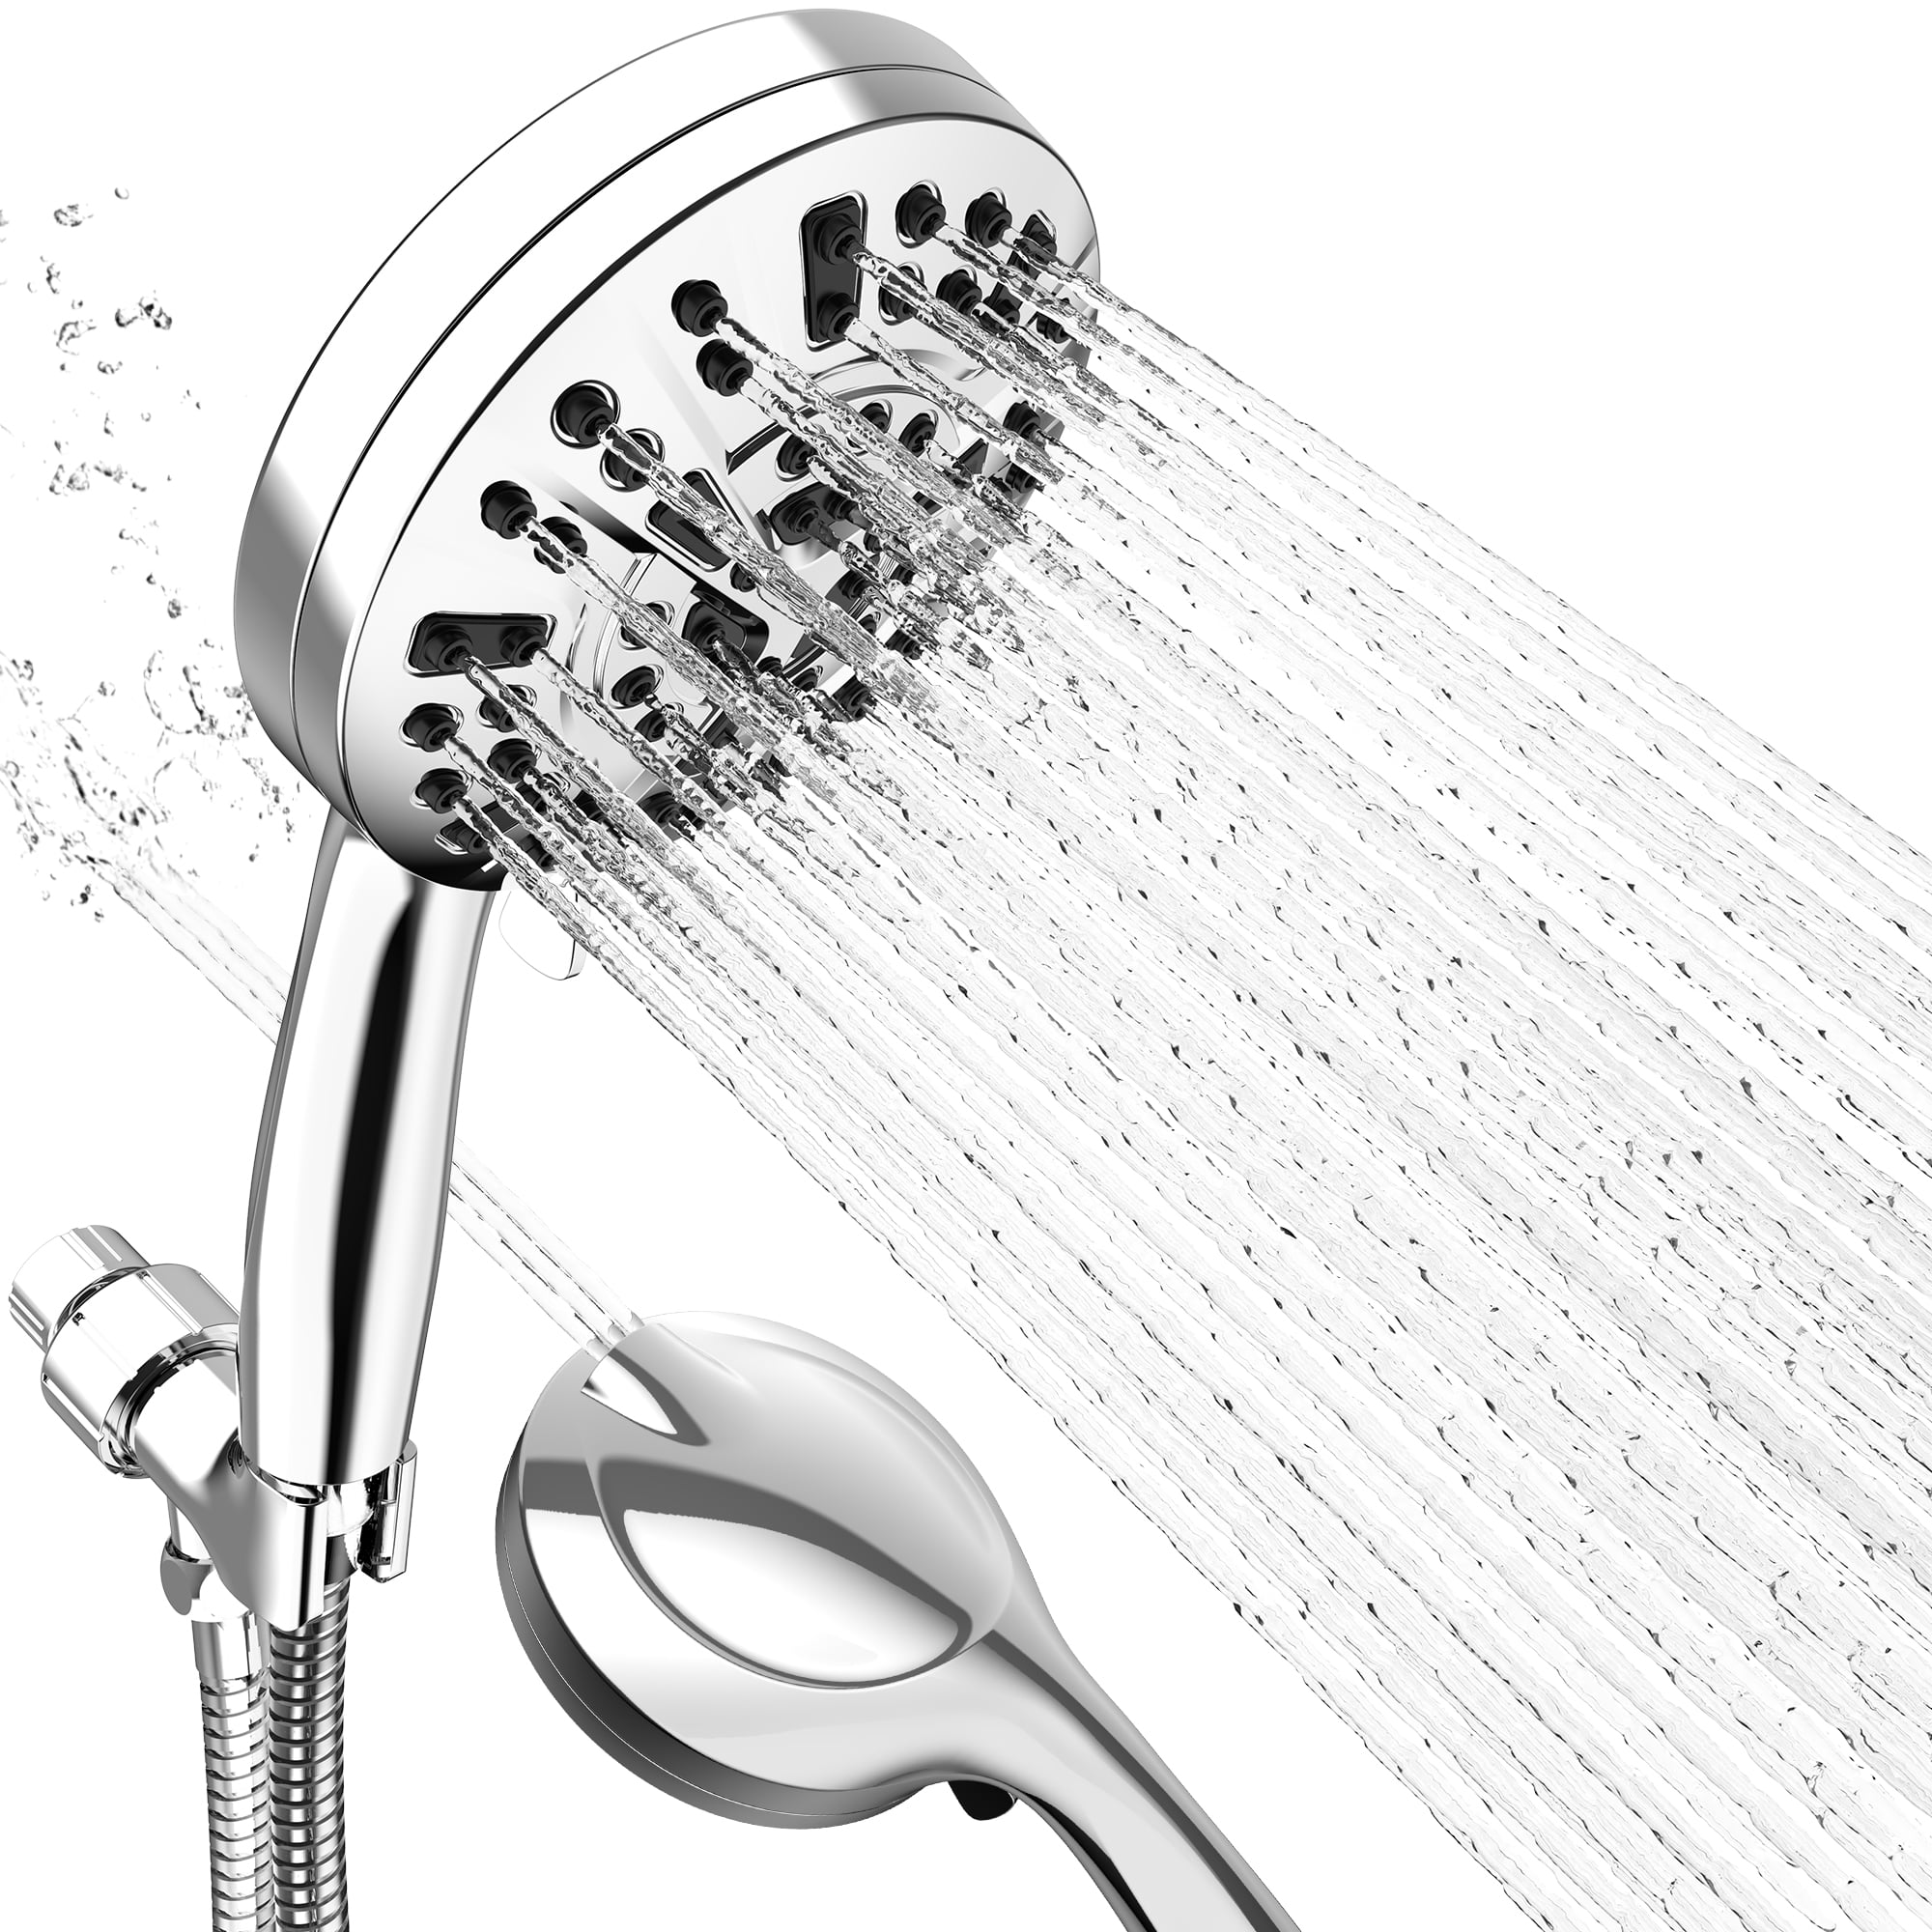 High Pressure Handheld Shower Head with 8 Functions, Built-in 2 Power Wash, Showerhead with 59